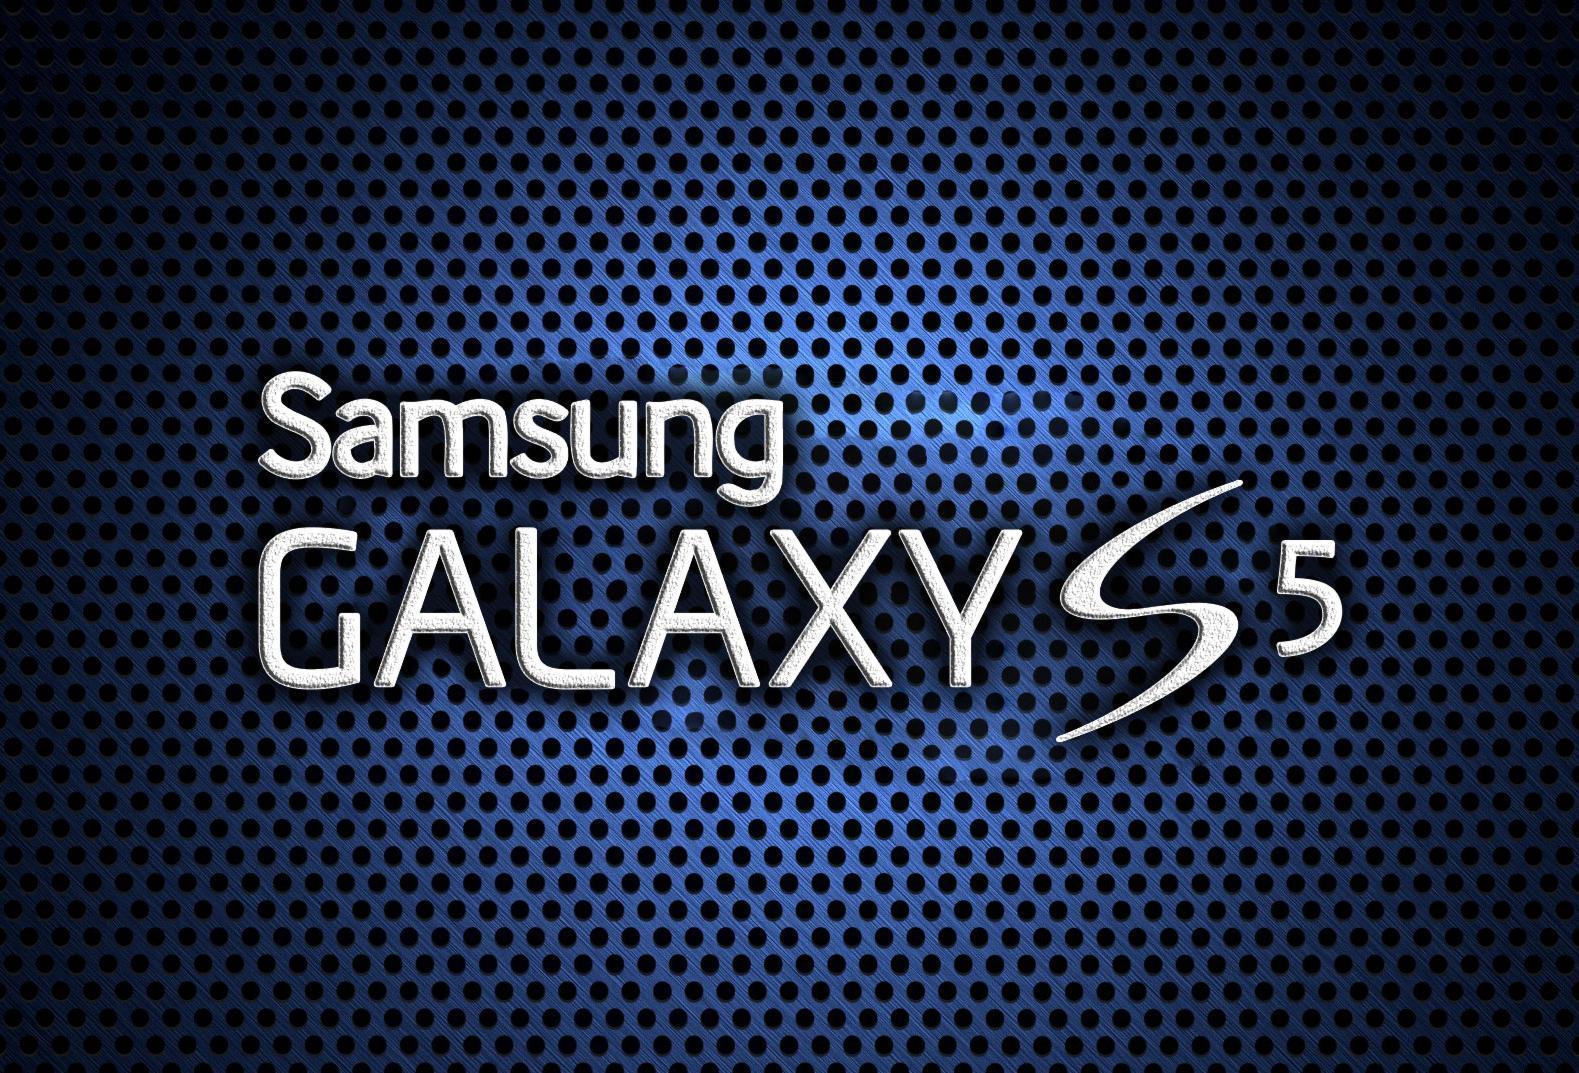 Samsung Galaxy S5 Logo - Samsung Putting the Galaxy S Gear and Gear Fit on Preview